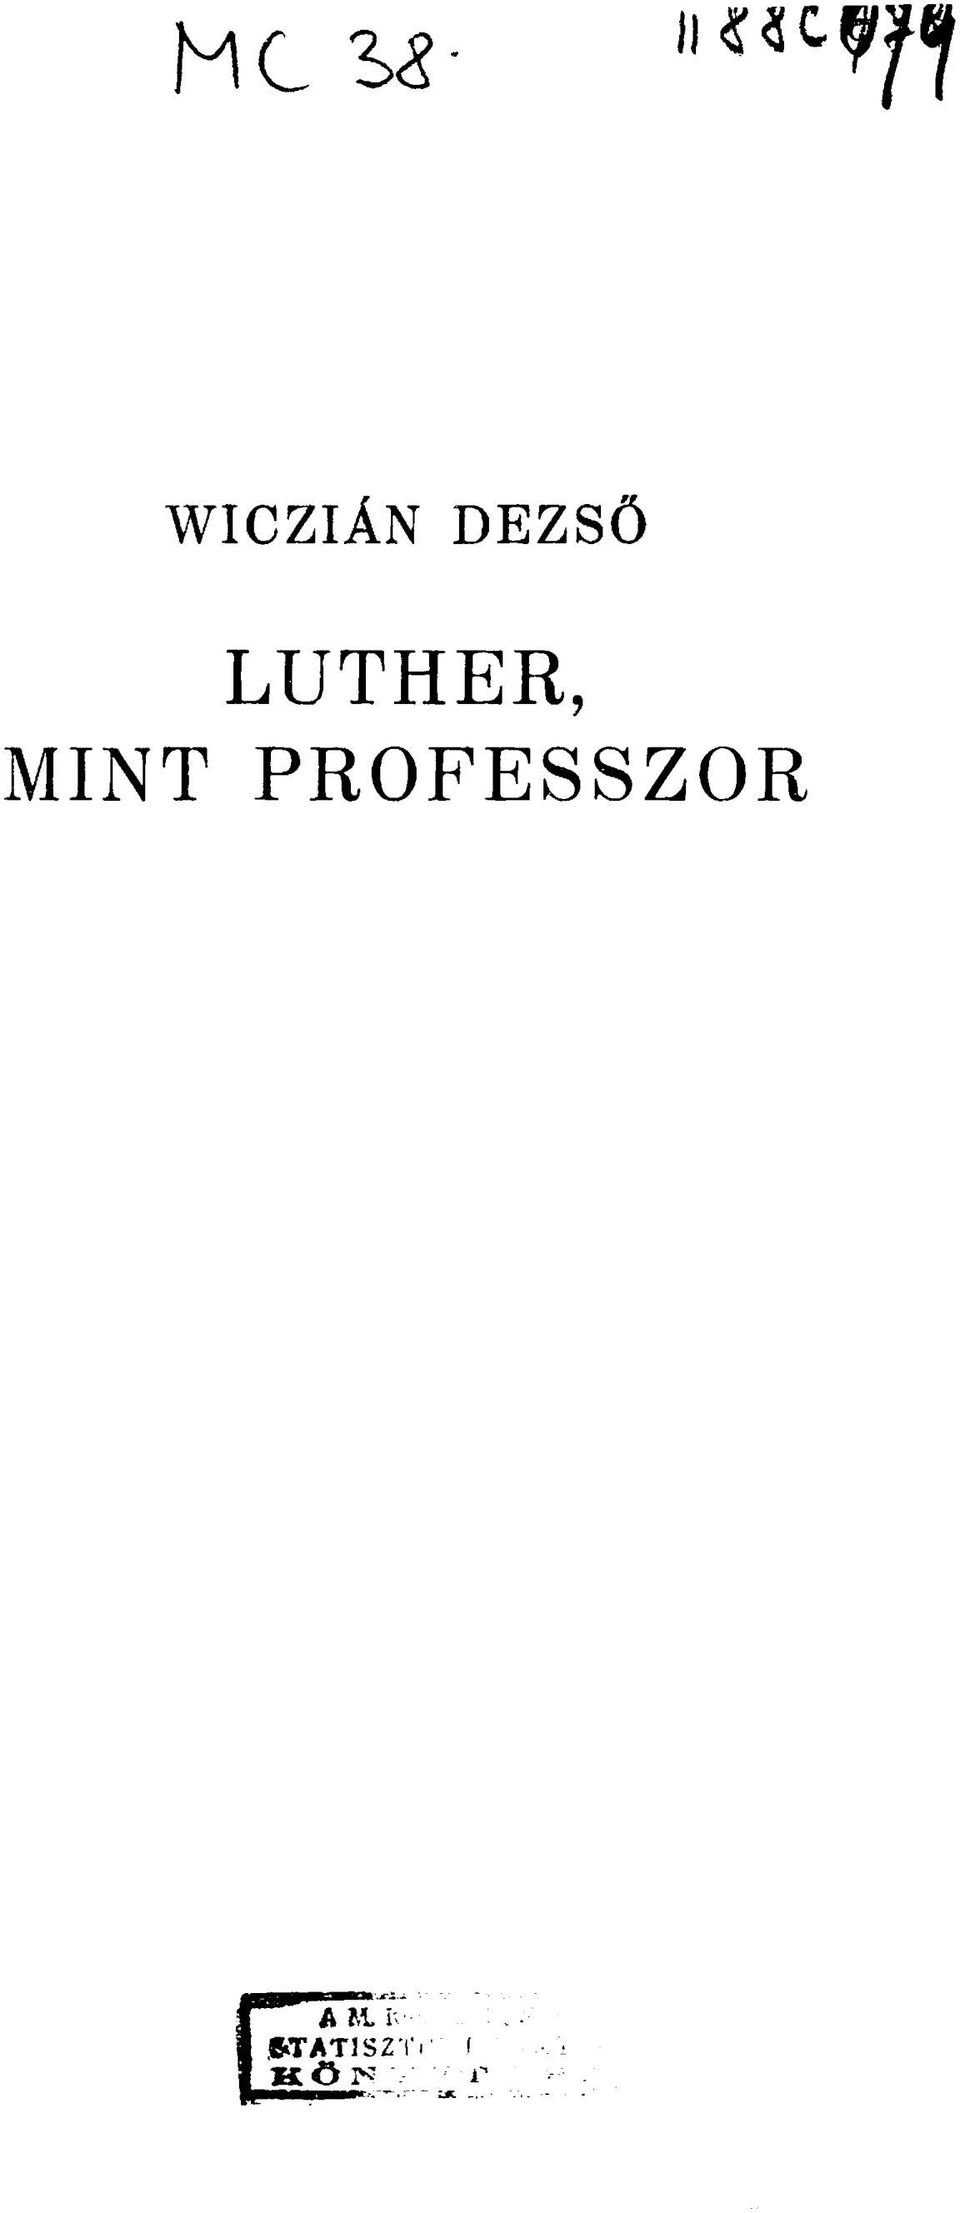 LUTHER,